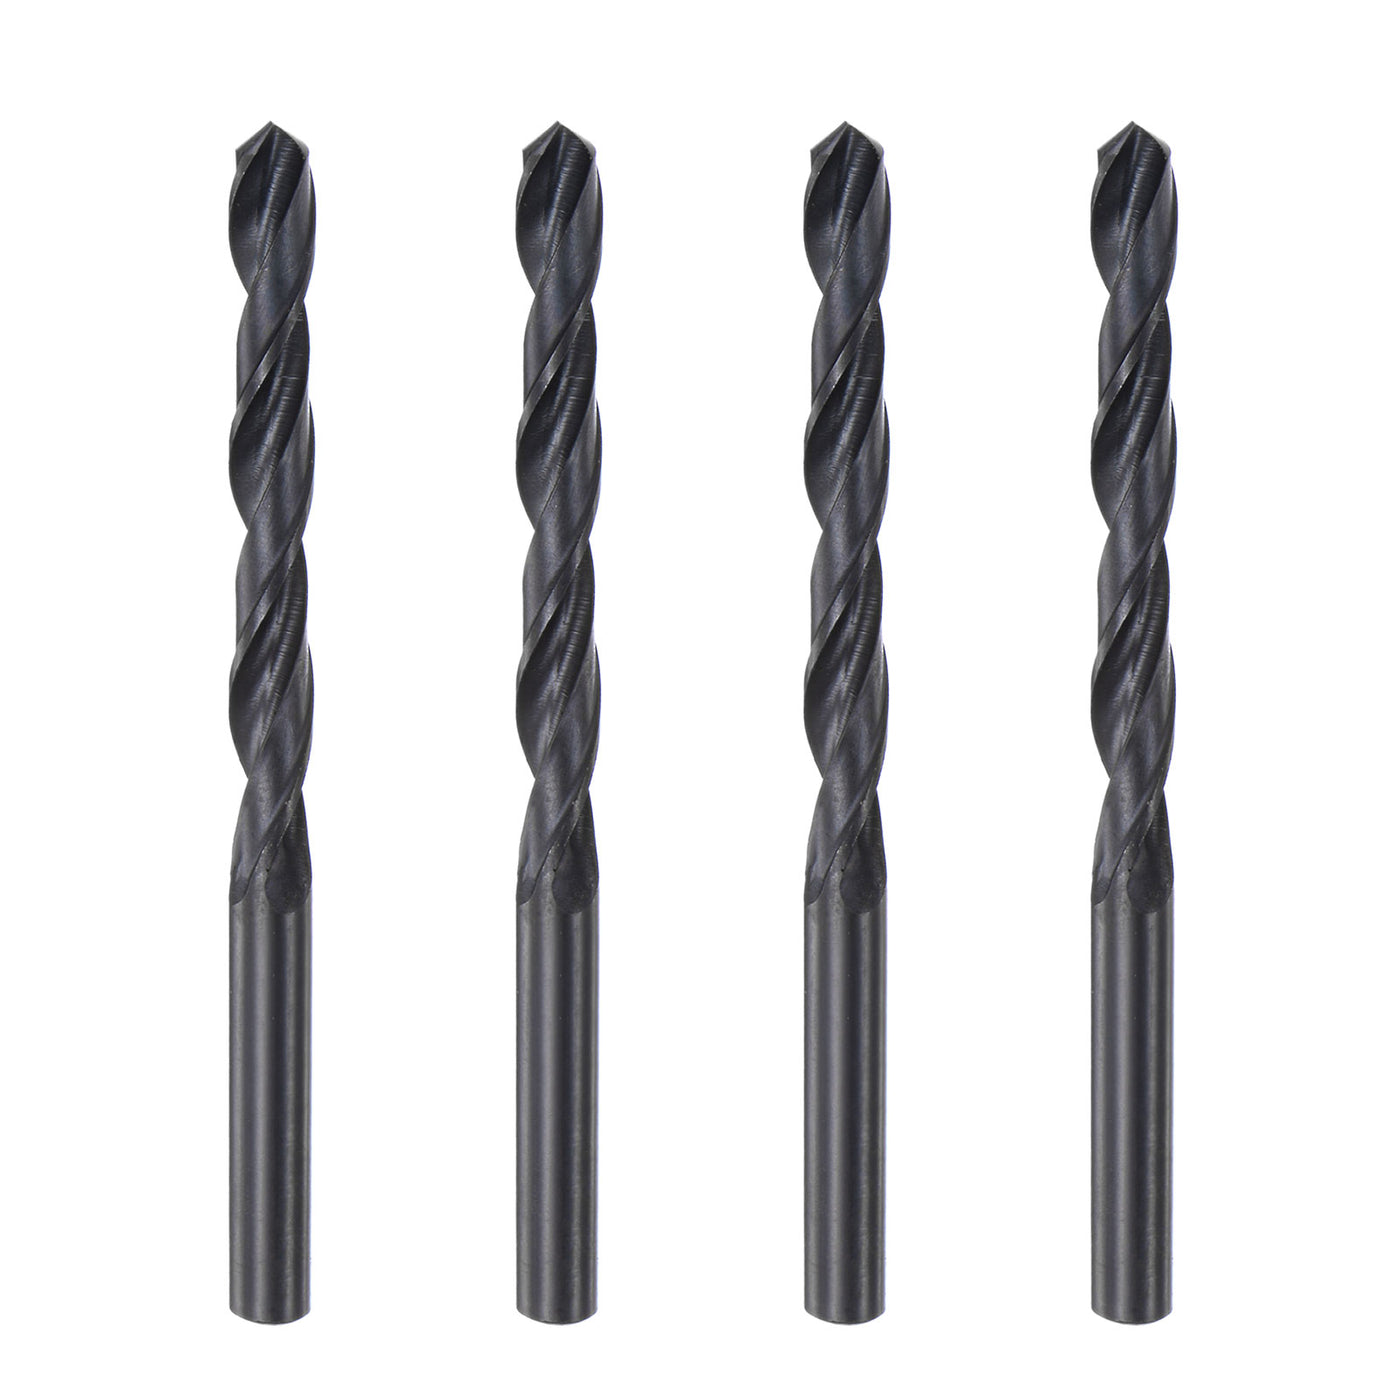 uxcell Uxcell High Speed Steel Twist Drill Bit, 7.5mm Fully Ground Black Oxide 108mm Long 4Pcs